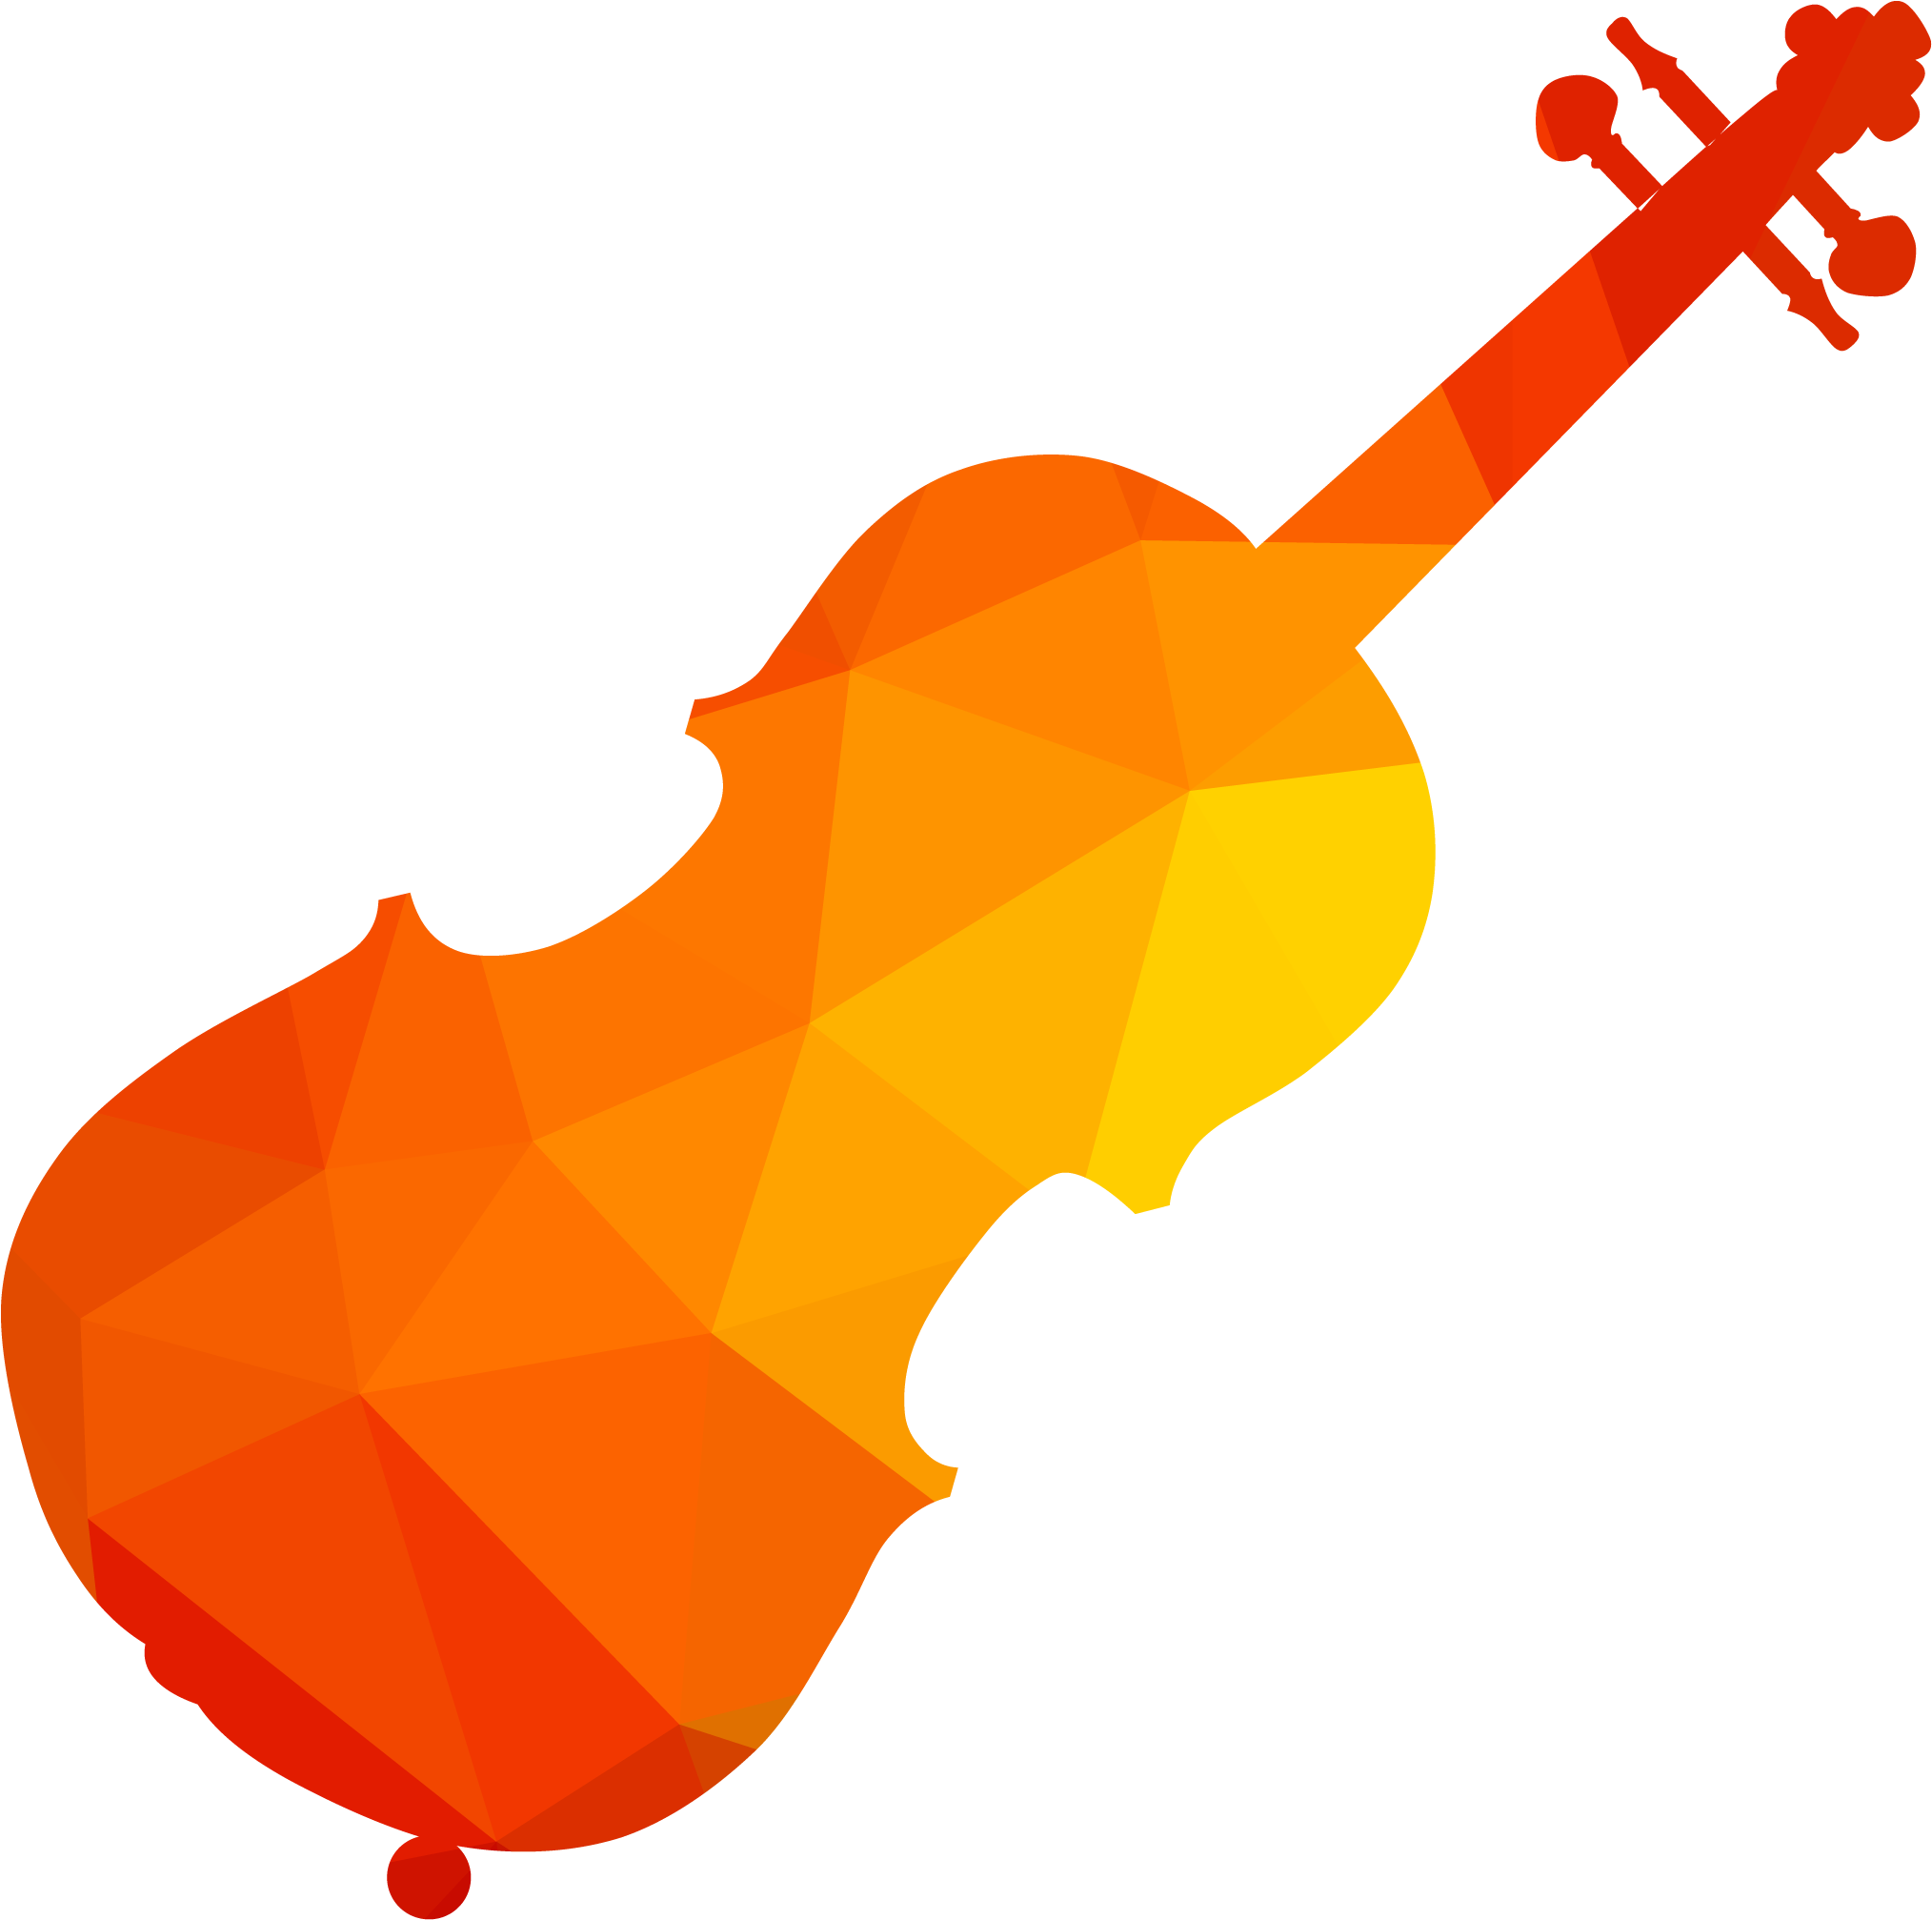 Violin Technique Black And White Clip Art - Fiddler On The Roof (2100x2100)